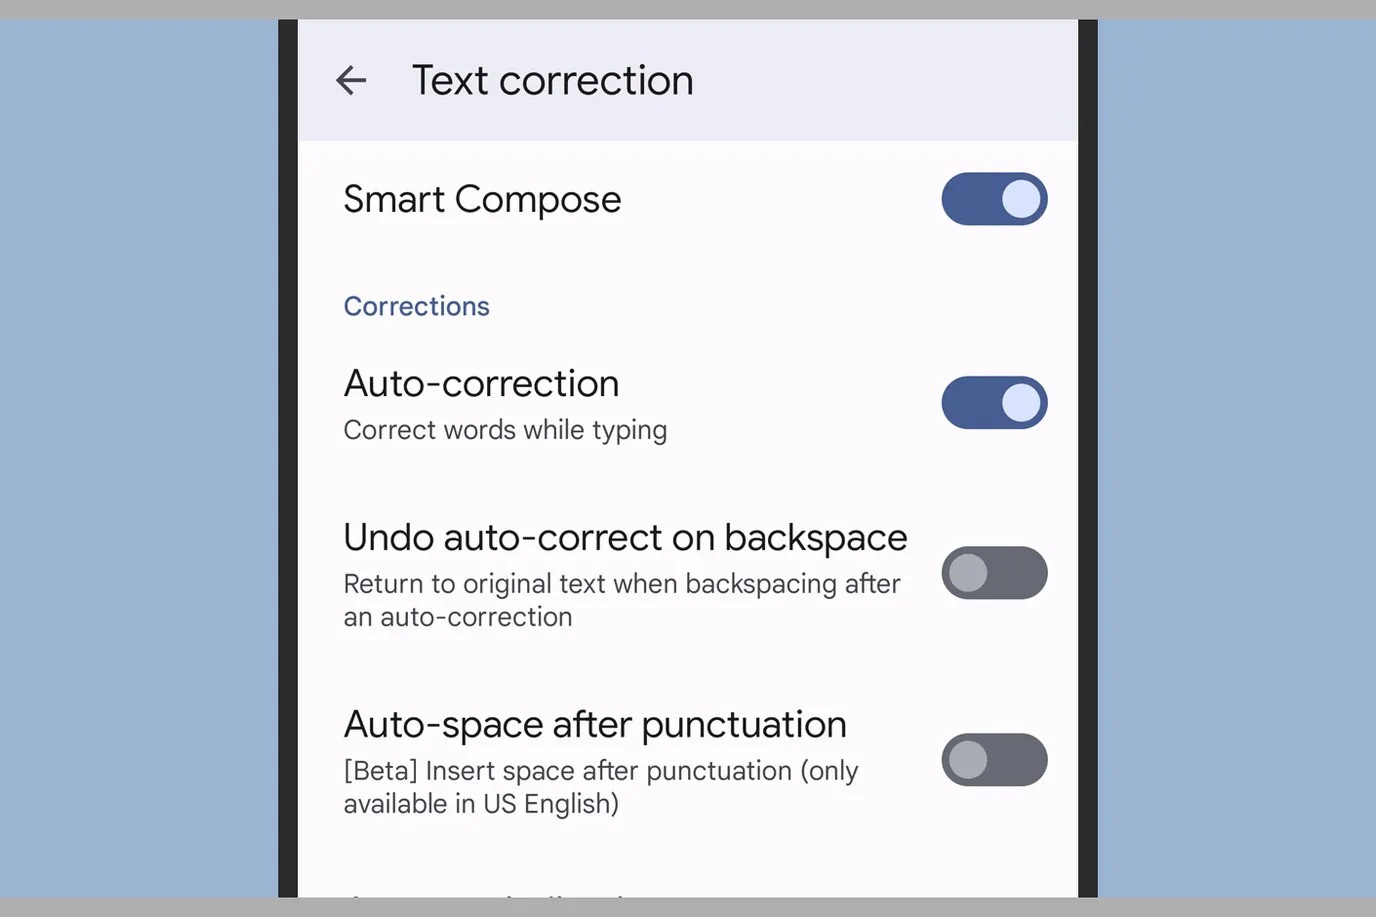 Turning Off Autocorrect On Xiaomi: Step-by-Step Guide